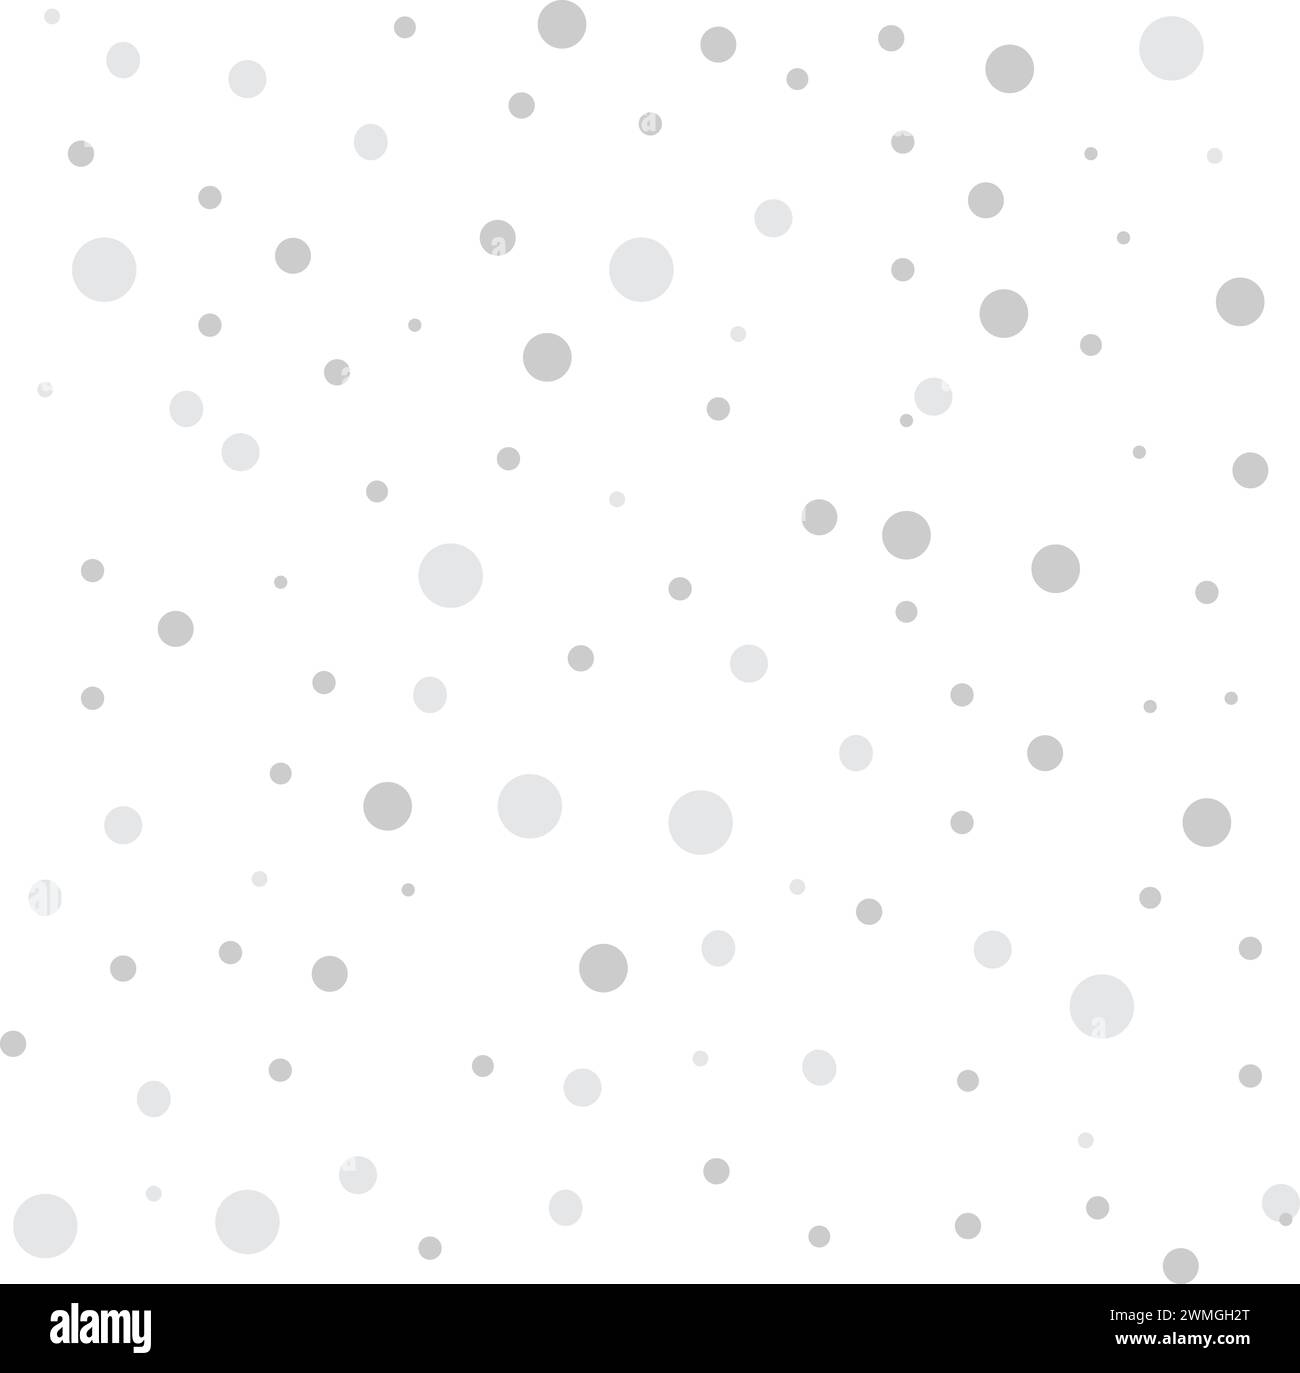 Gray  dots white background like snowflakes. Template for social networking, app, web, greeting card, invitation, baby shower, newborn and any design. Stock Photo